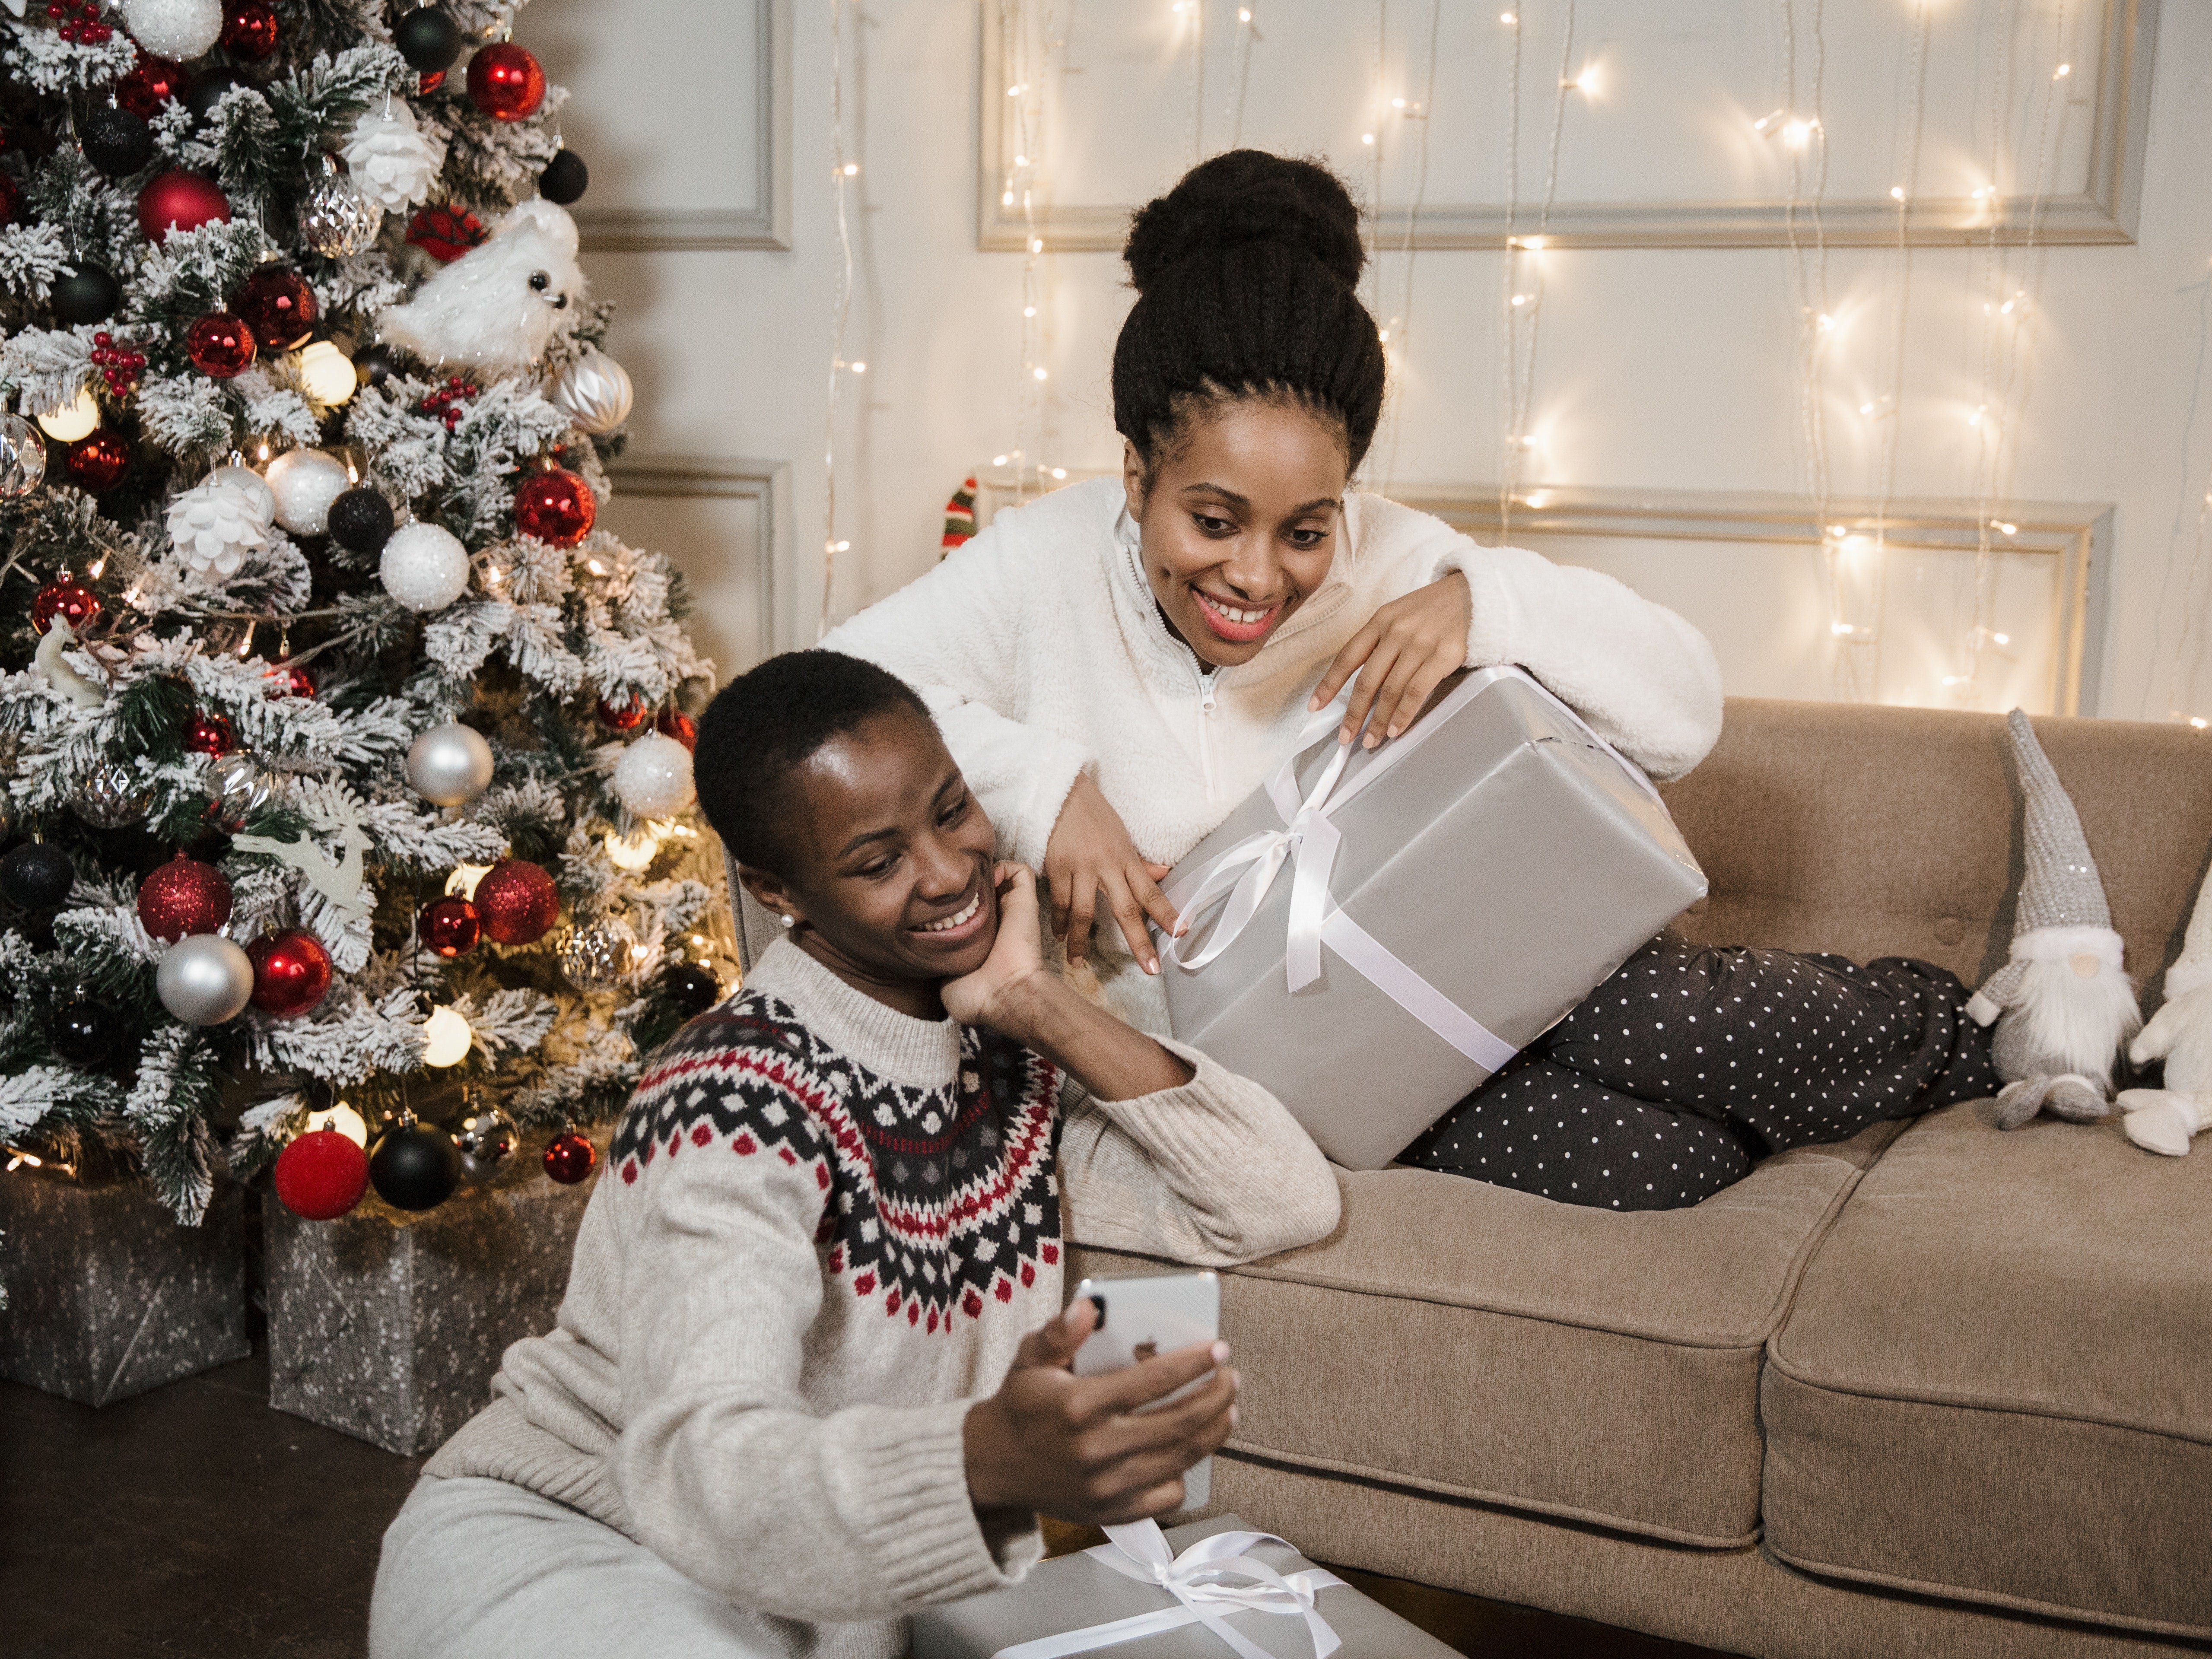 7 Tips for Giving The Gift Of Tech This Christmas (Parent's Edition)